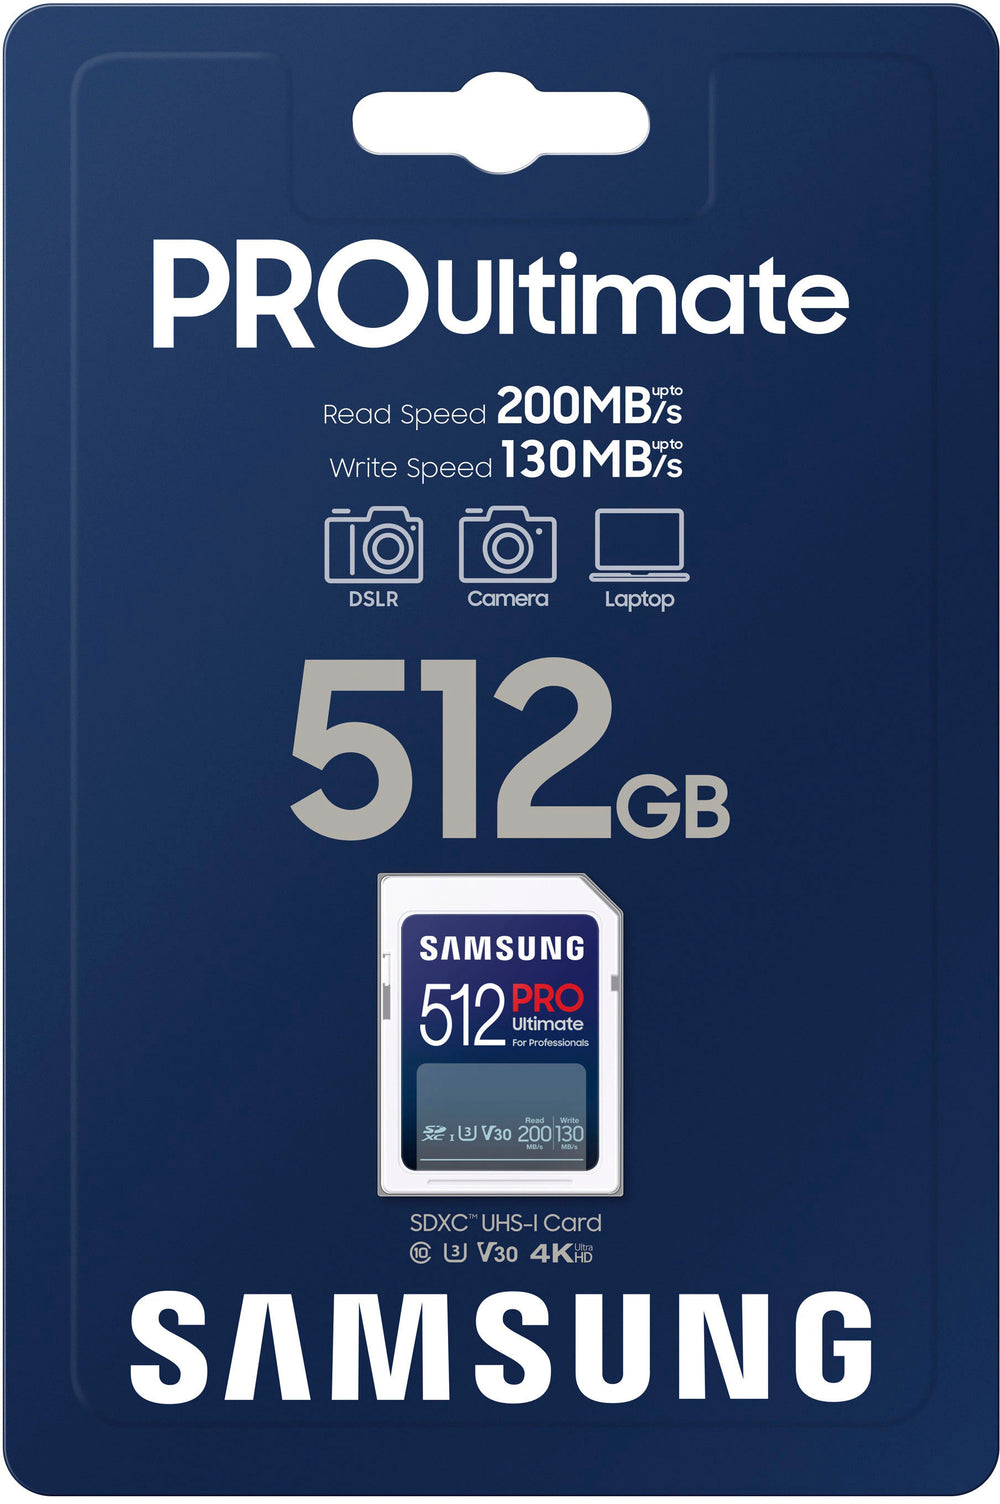 Samsung - PRO Ultimate Full Size 512GB SDXC Memory Card, Up to 200 MB/s, UHS I, C10, U3, V30, A2 (MB_1